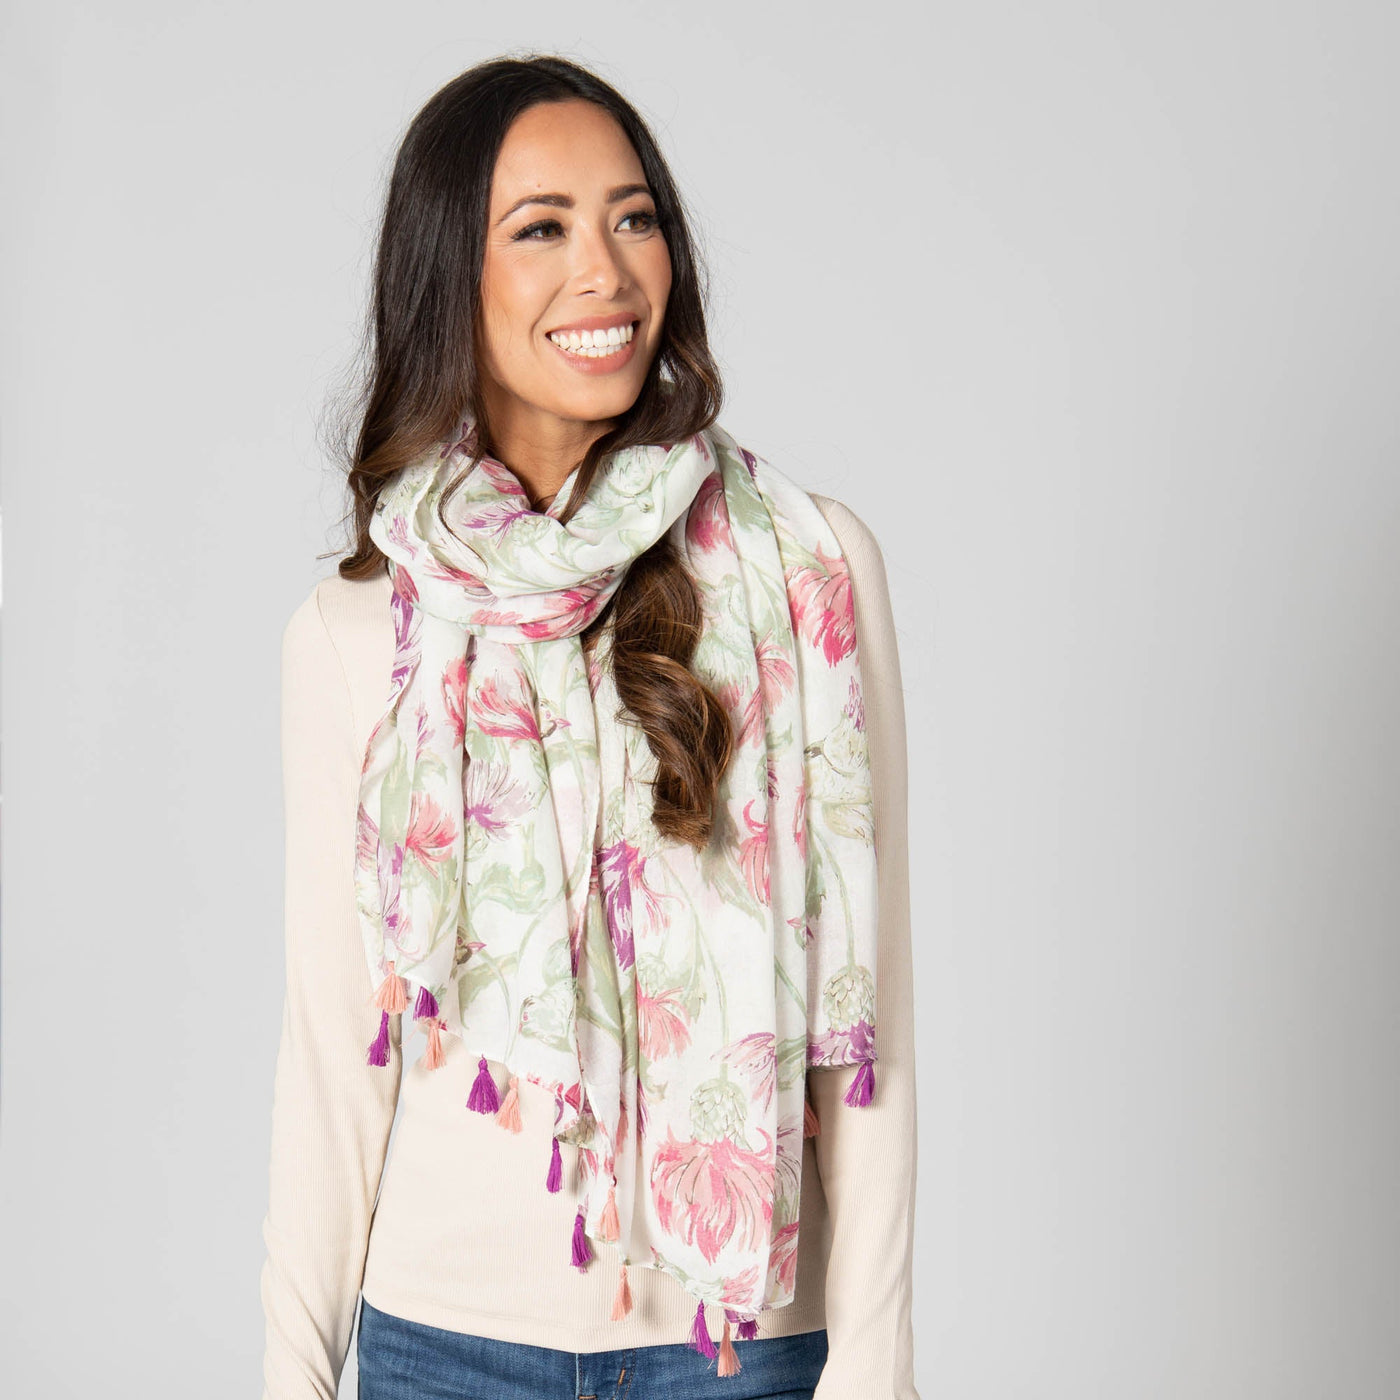 SCARF - Vacay Mode - Light Weight Women's Woven Tropical Printed Scarf